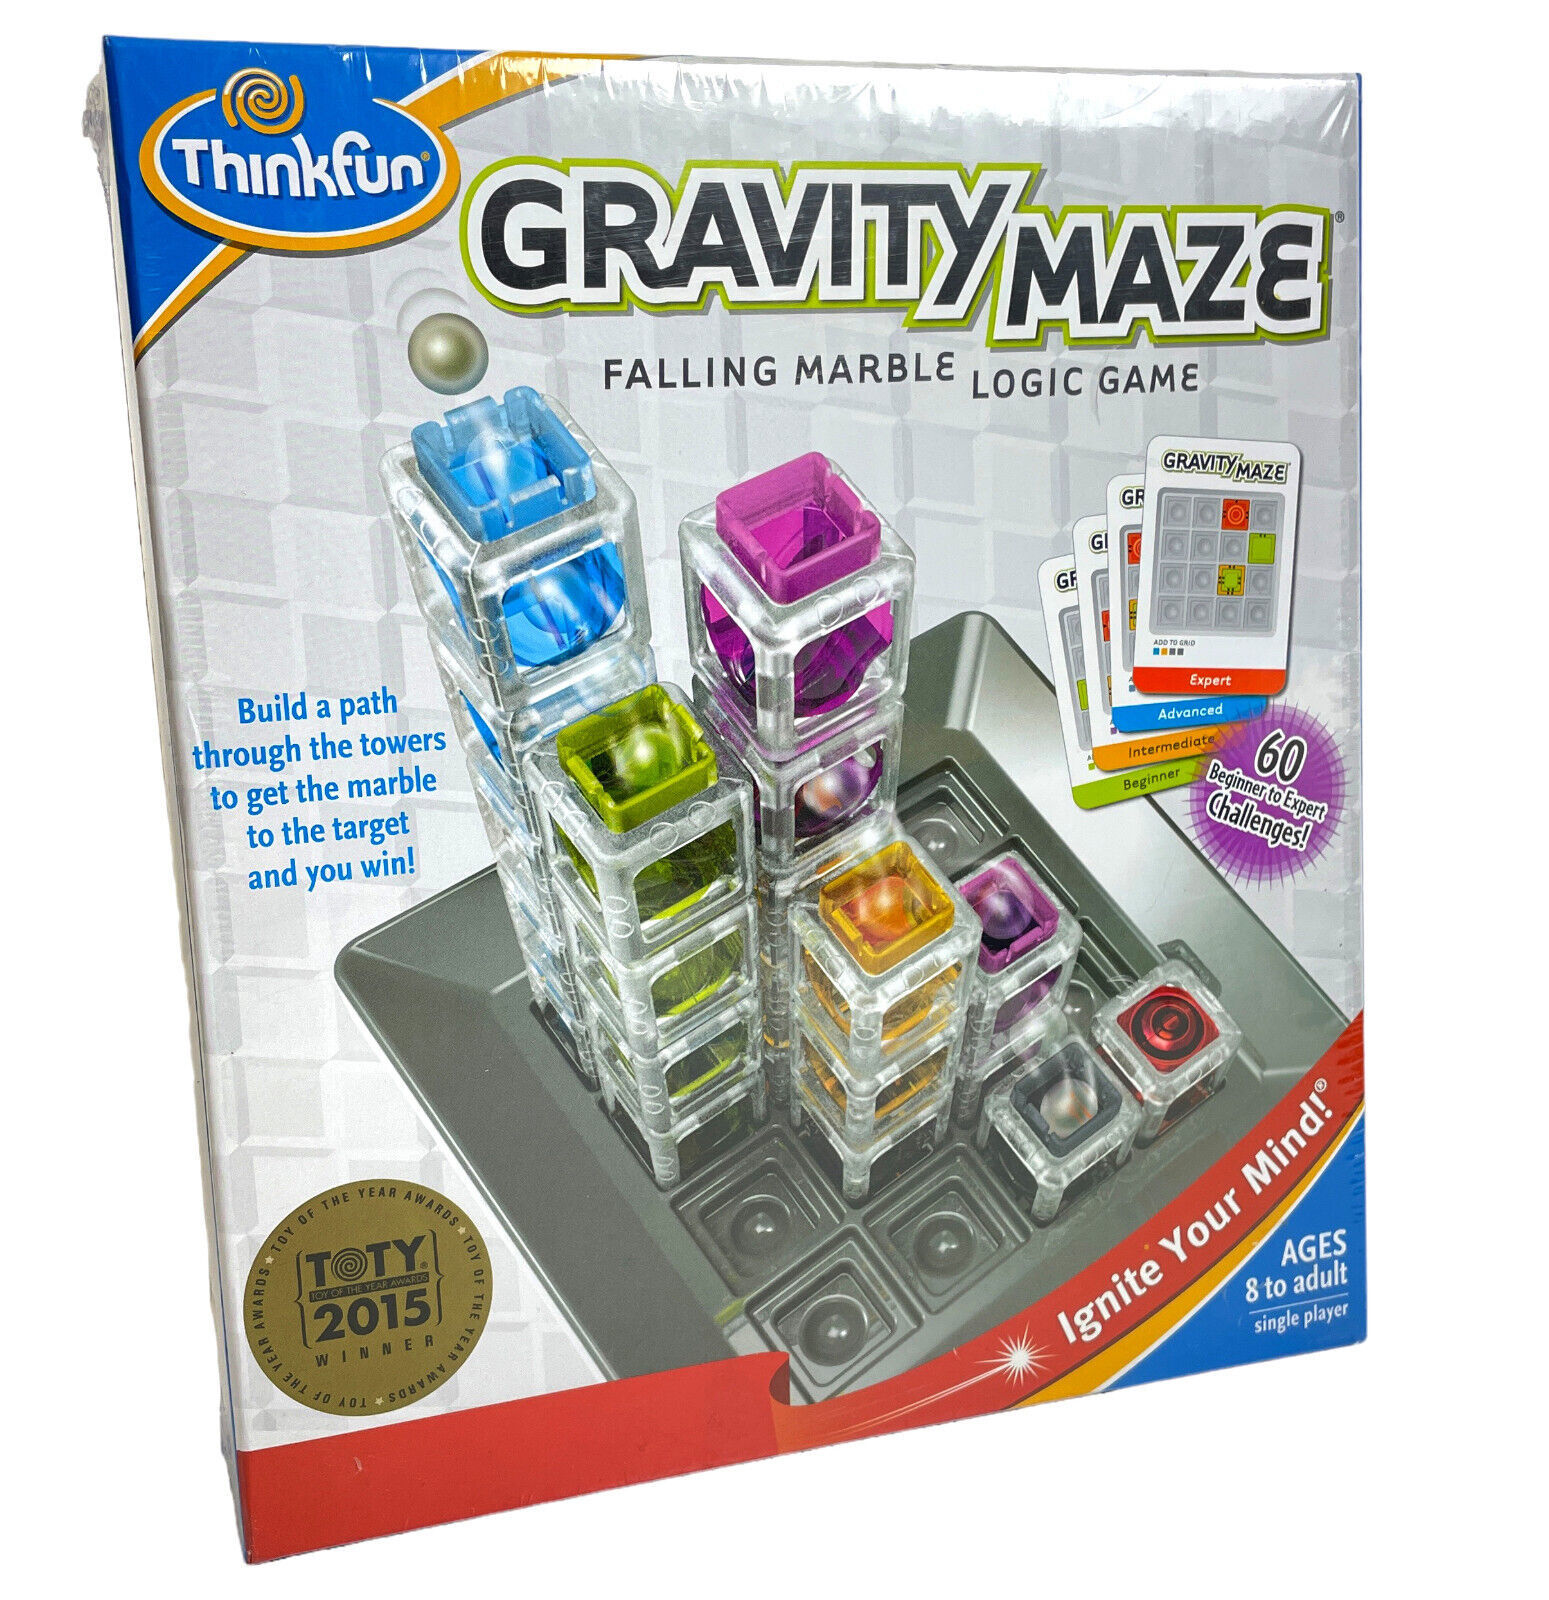 Thinkfun Gravity Maze Single player 8 to adult. New Sealed Toy of year 2015 - $14.95